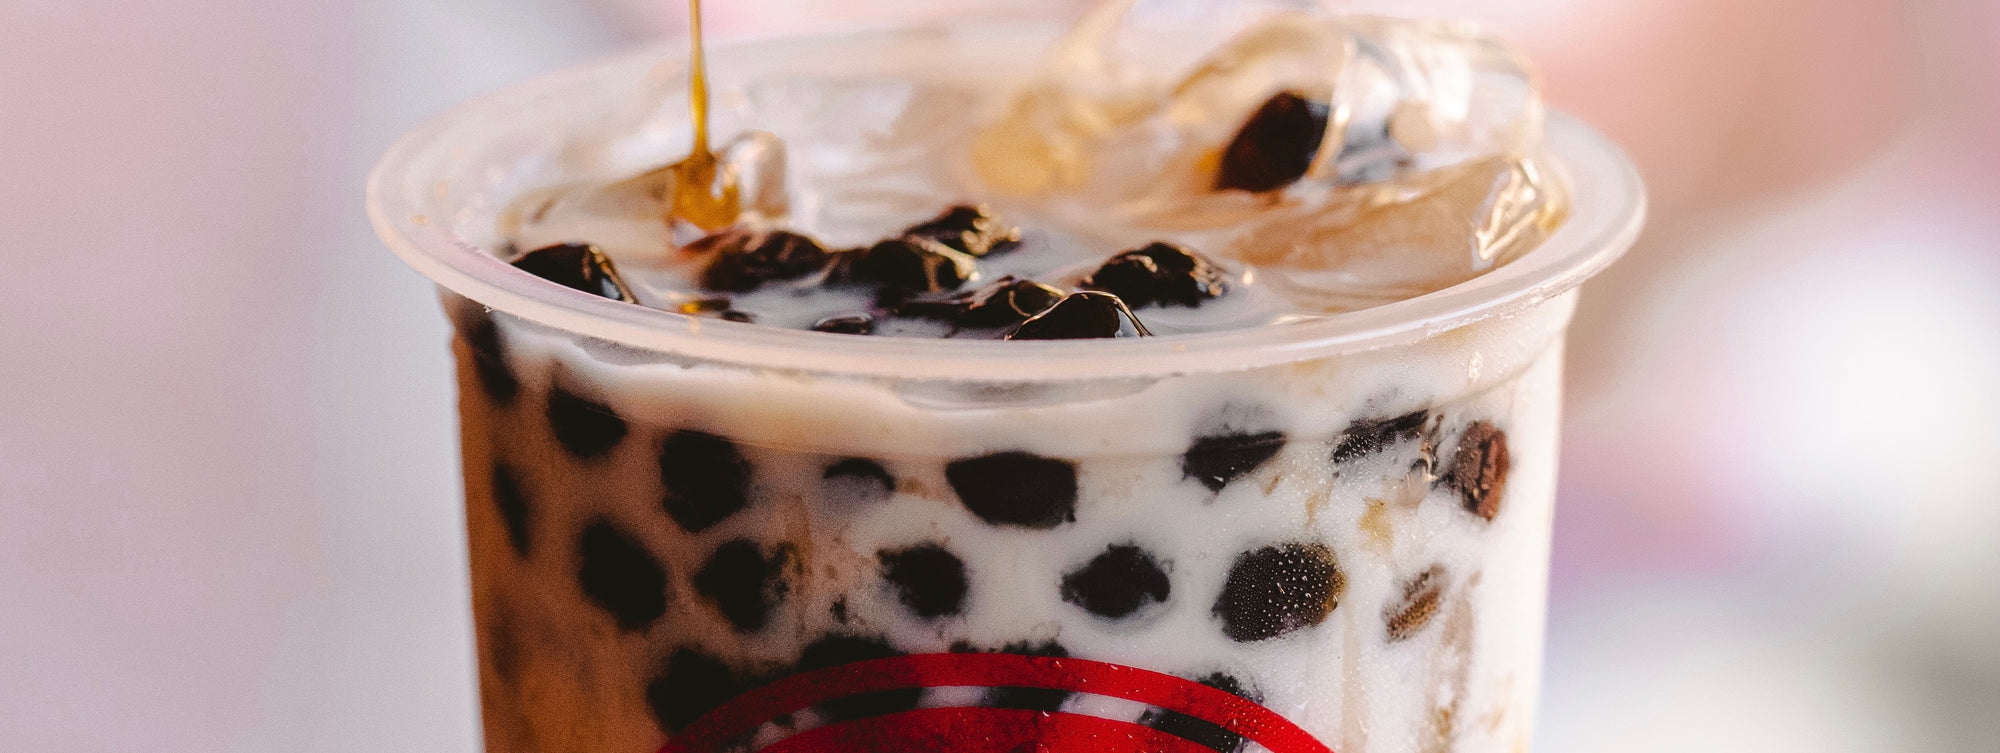 Alternative Uses For Bubble Tea Toppings